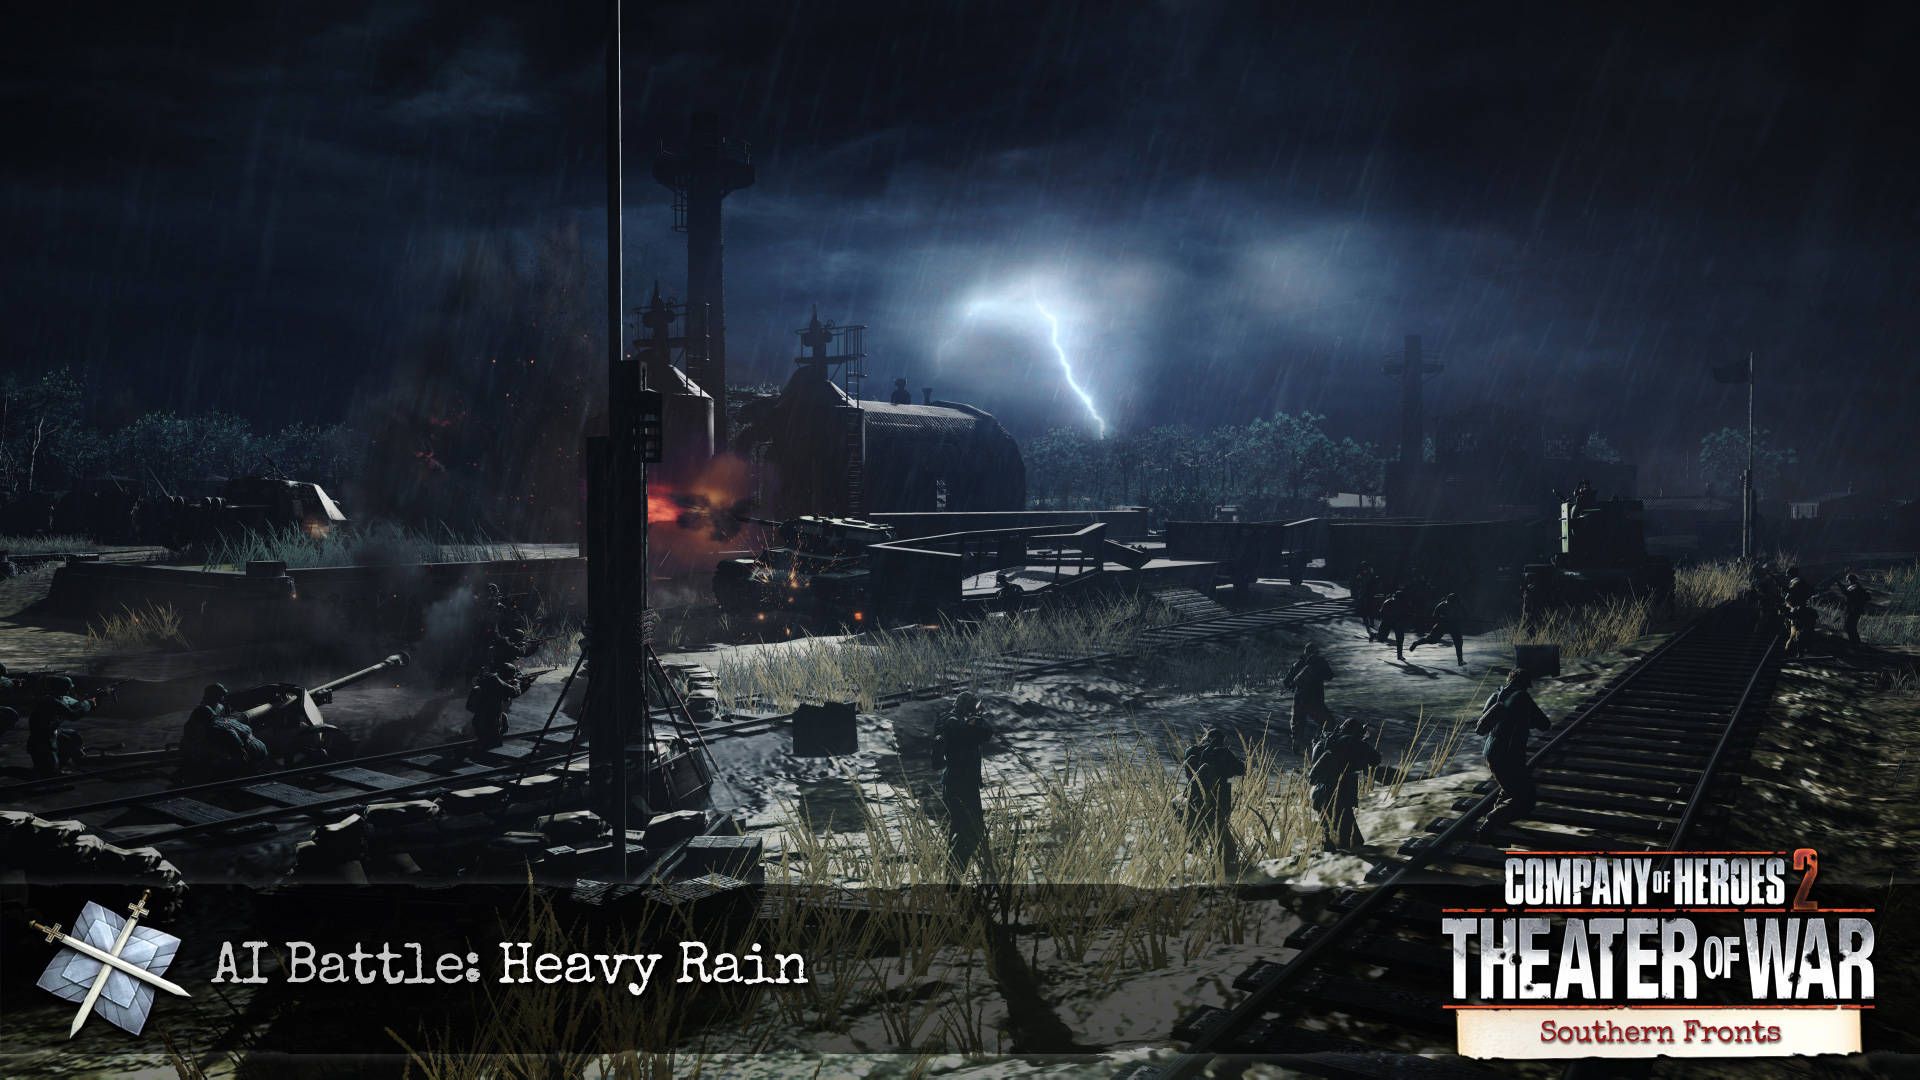 company of heroes 2 steam charts download free